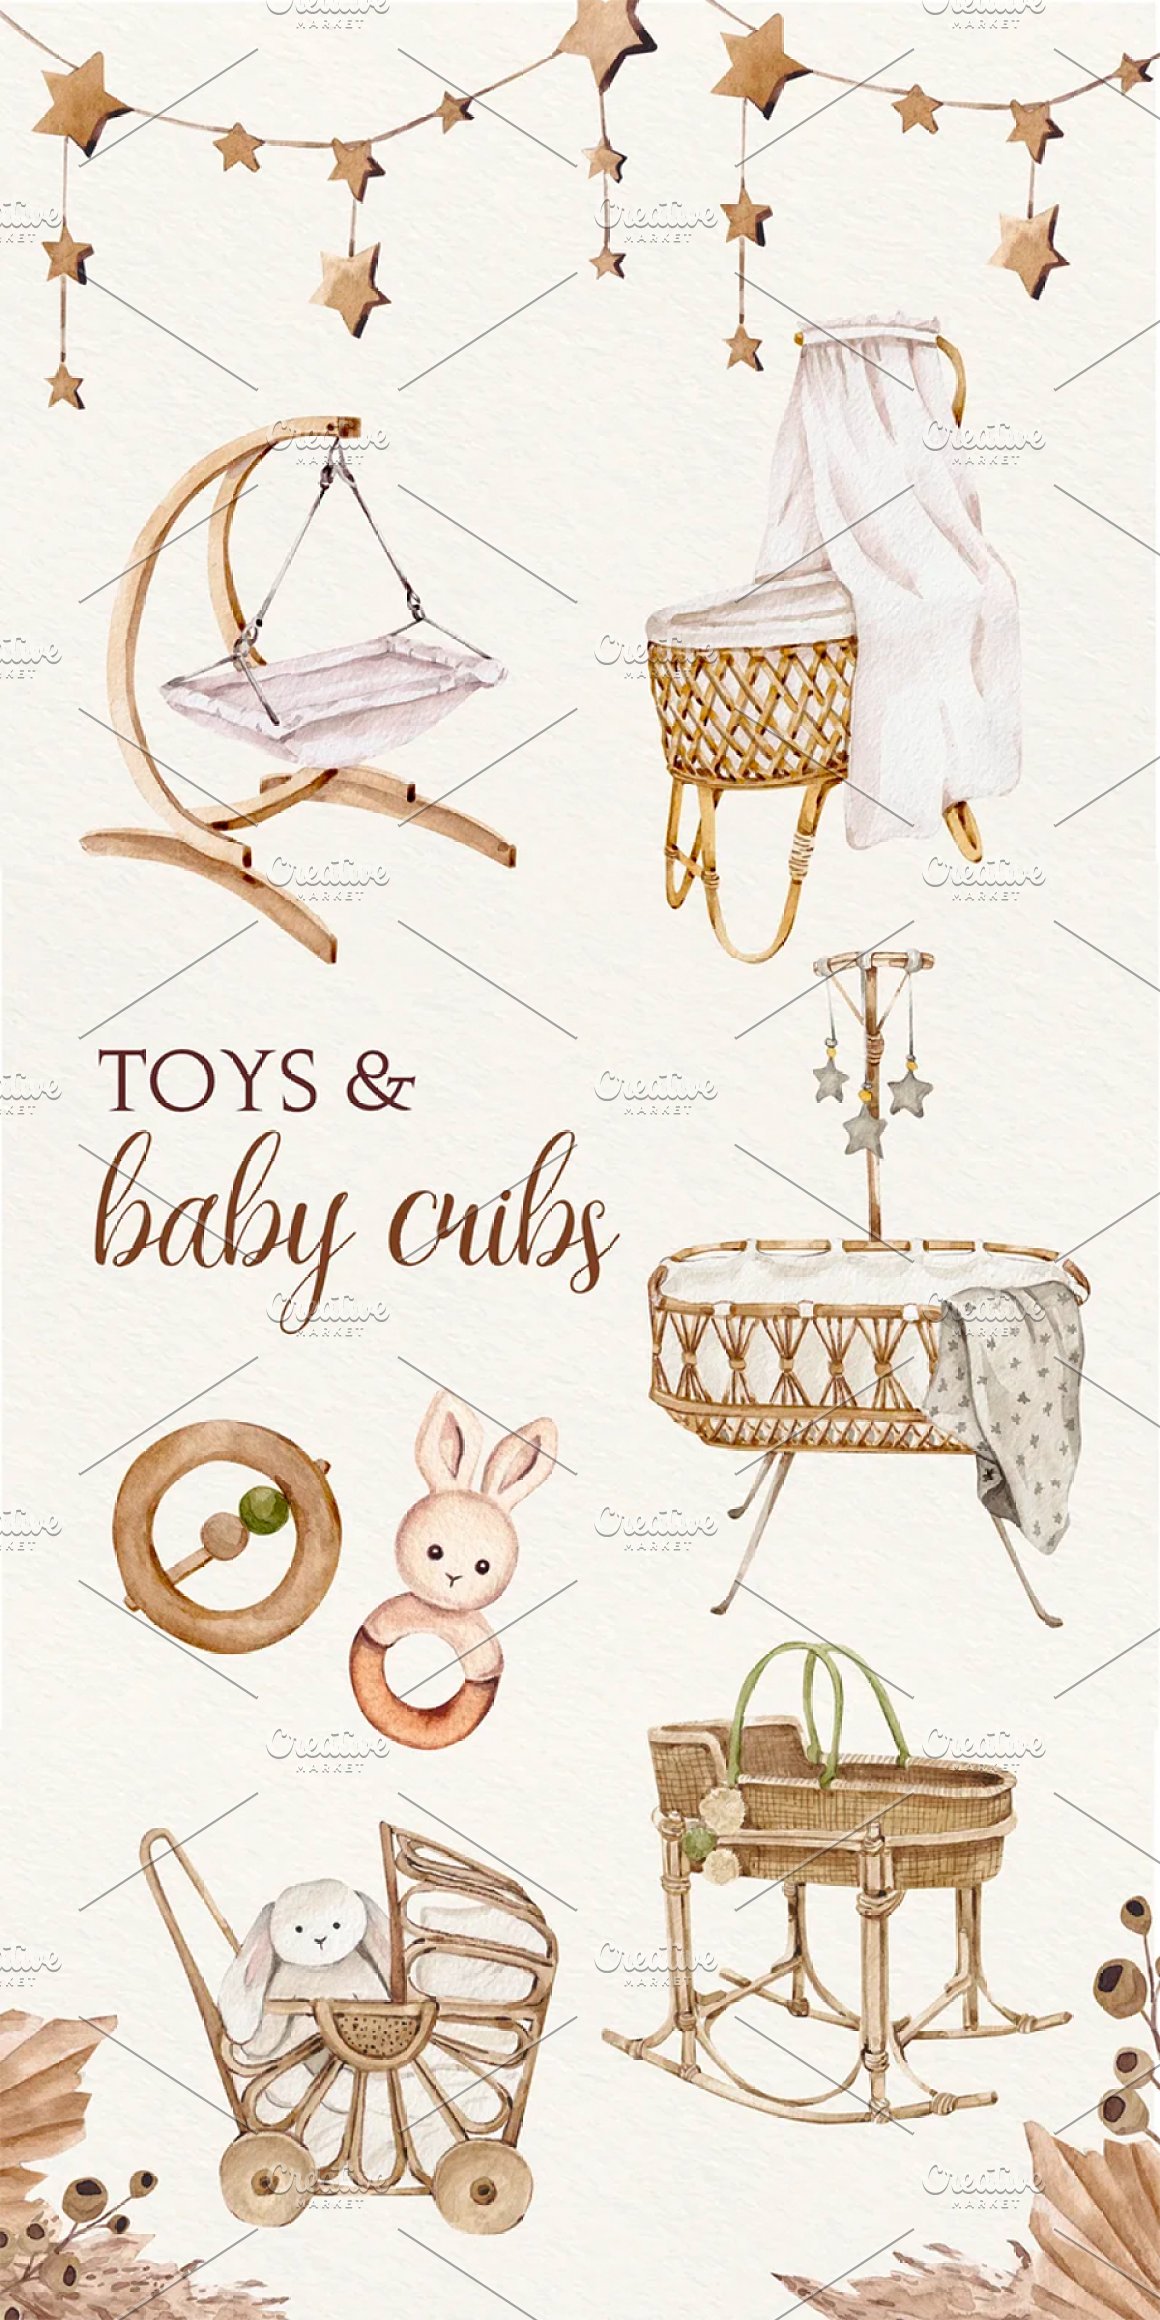 Toys and baby cribs.